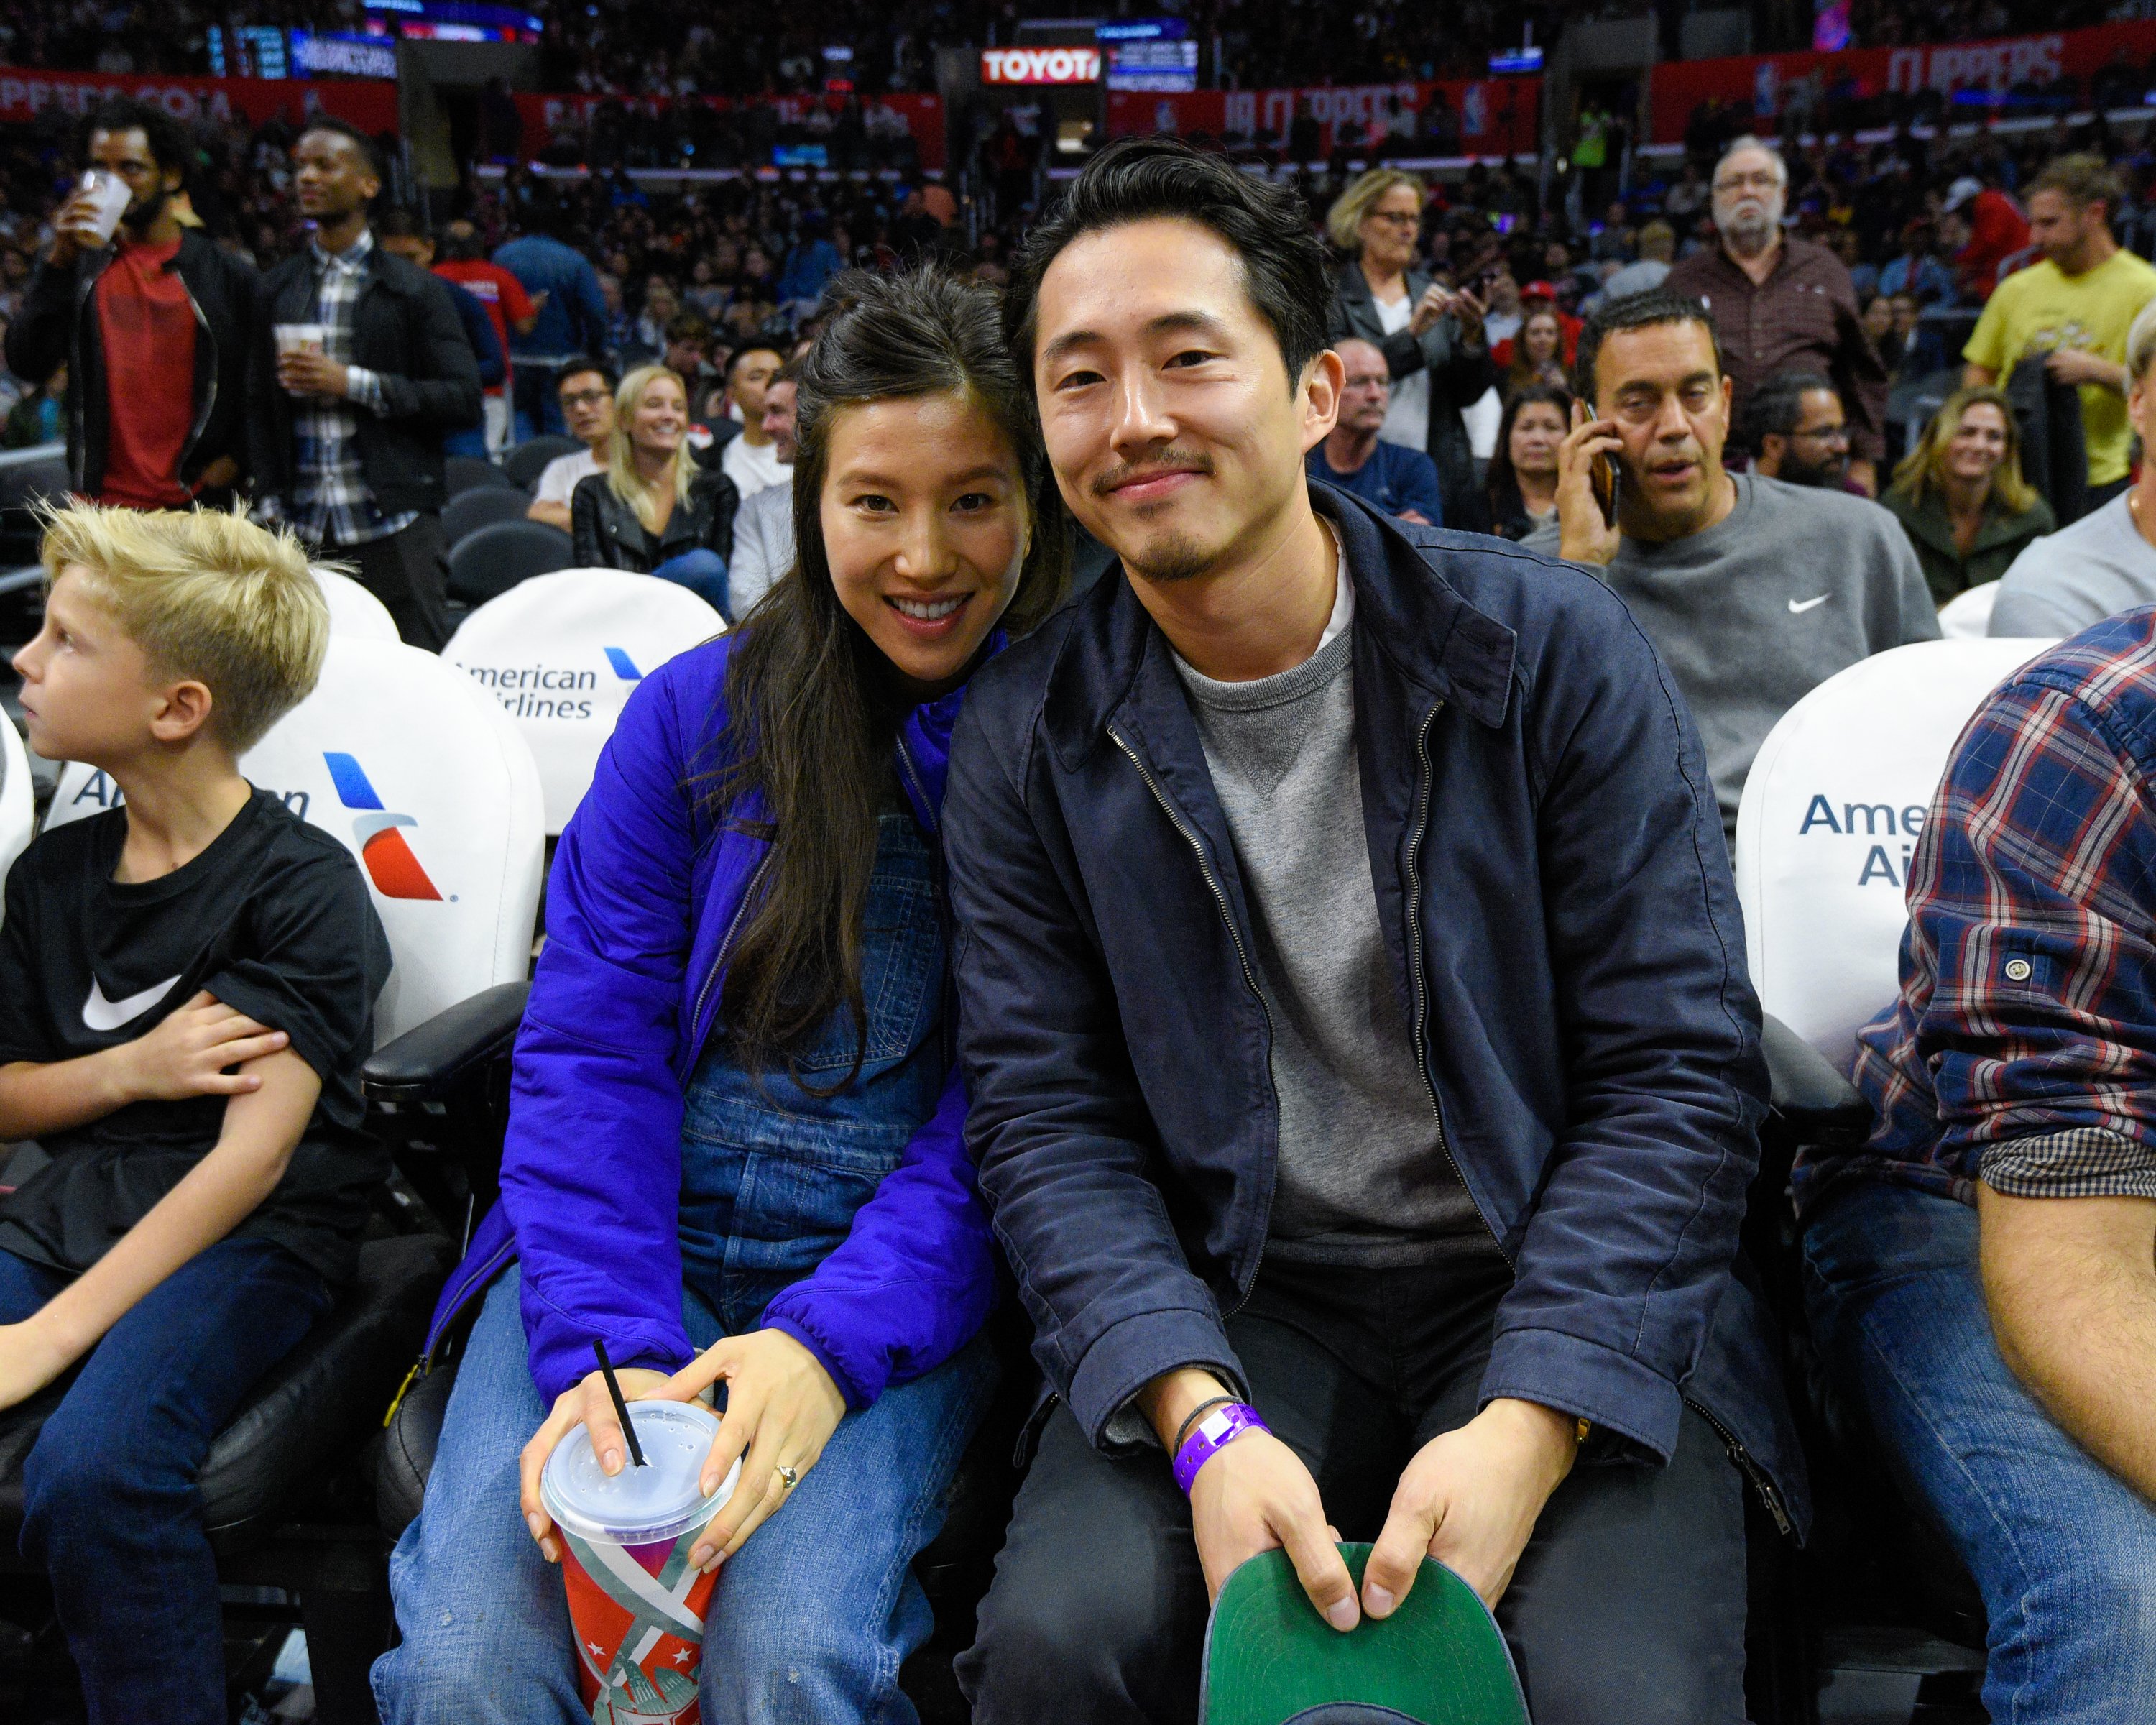 Steven Yeun and Joana Pak attend a basketball game on November 7, 2016 in Los Angeles, California. | Source: Getty Images